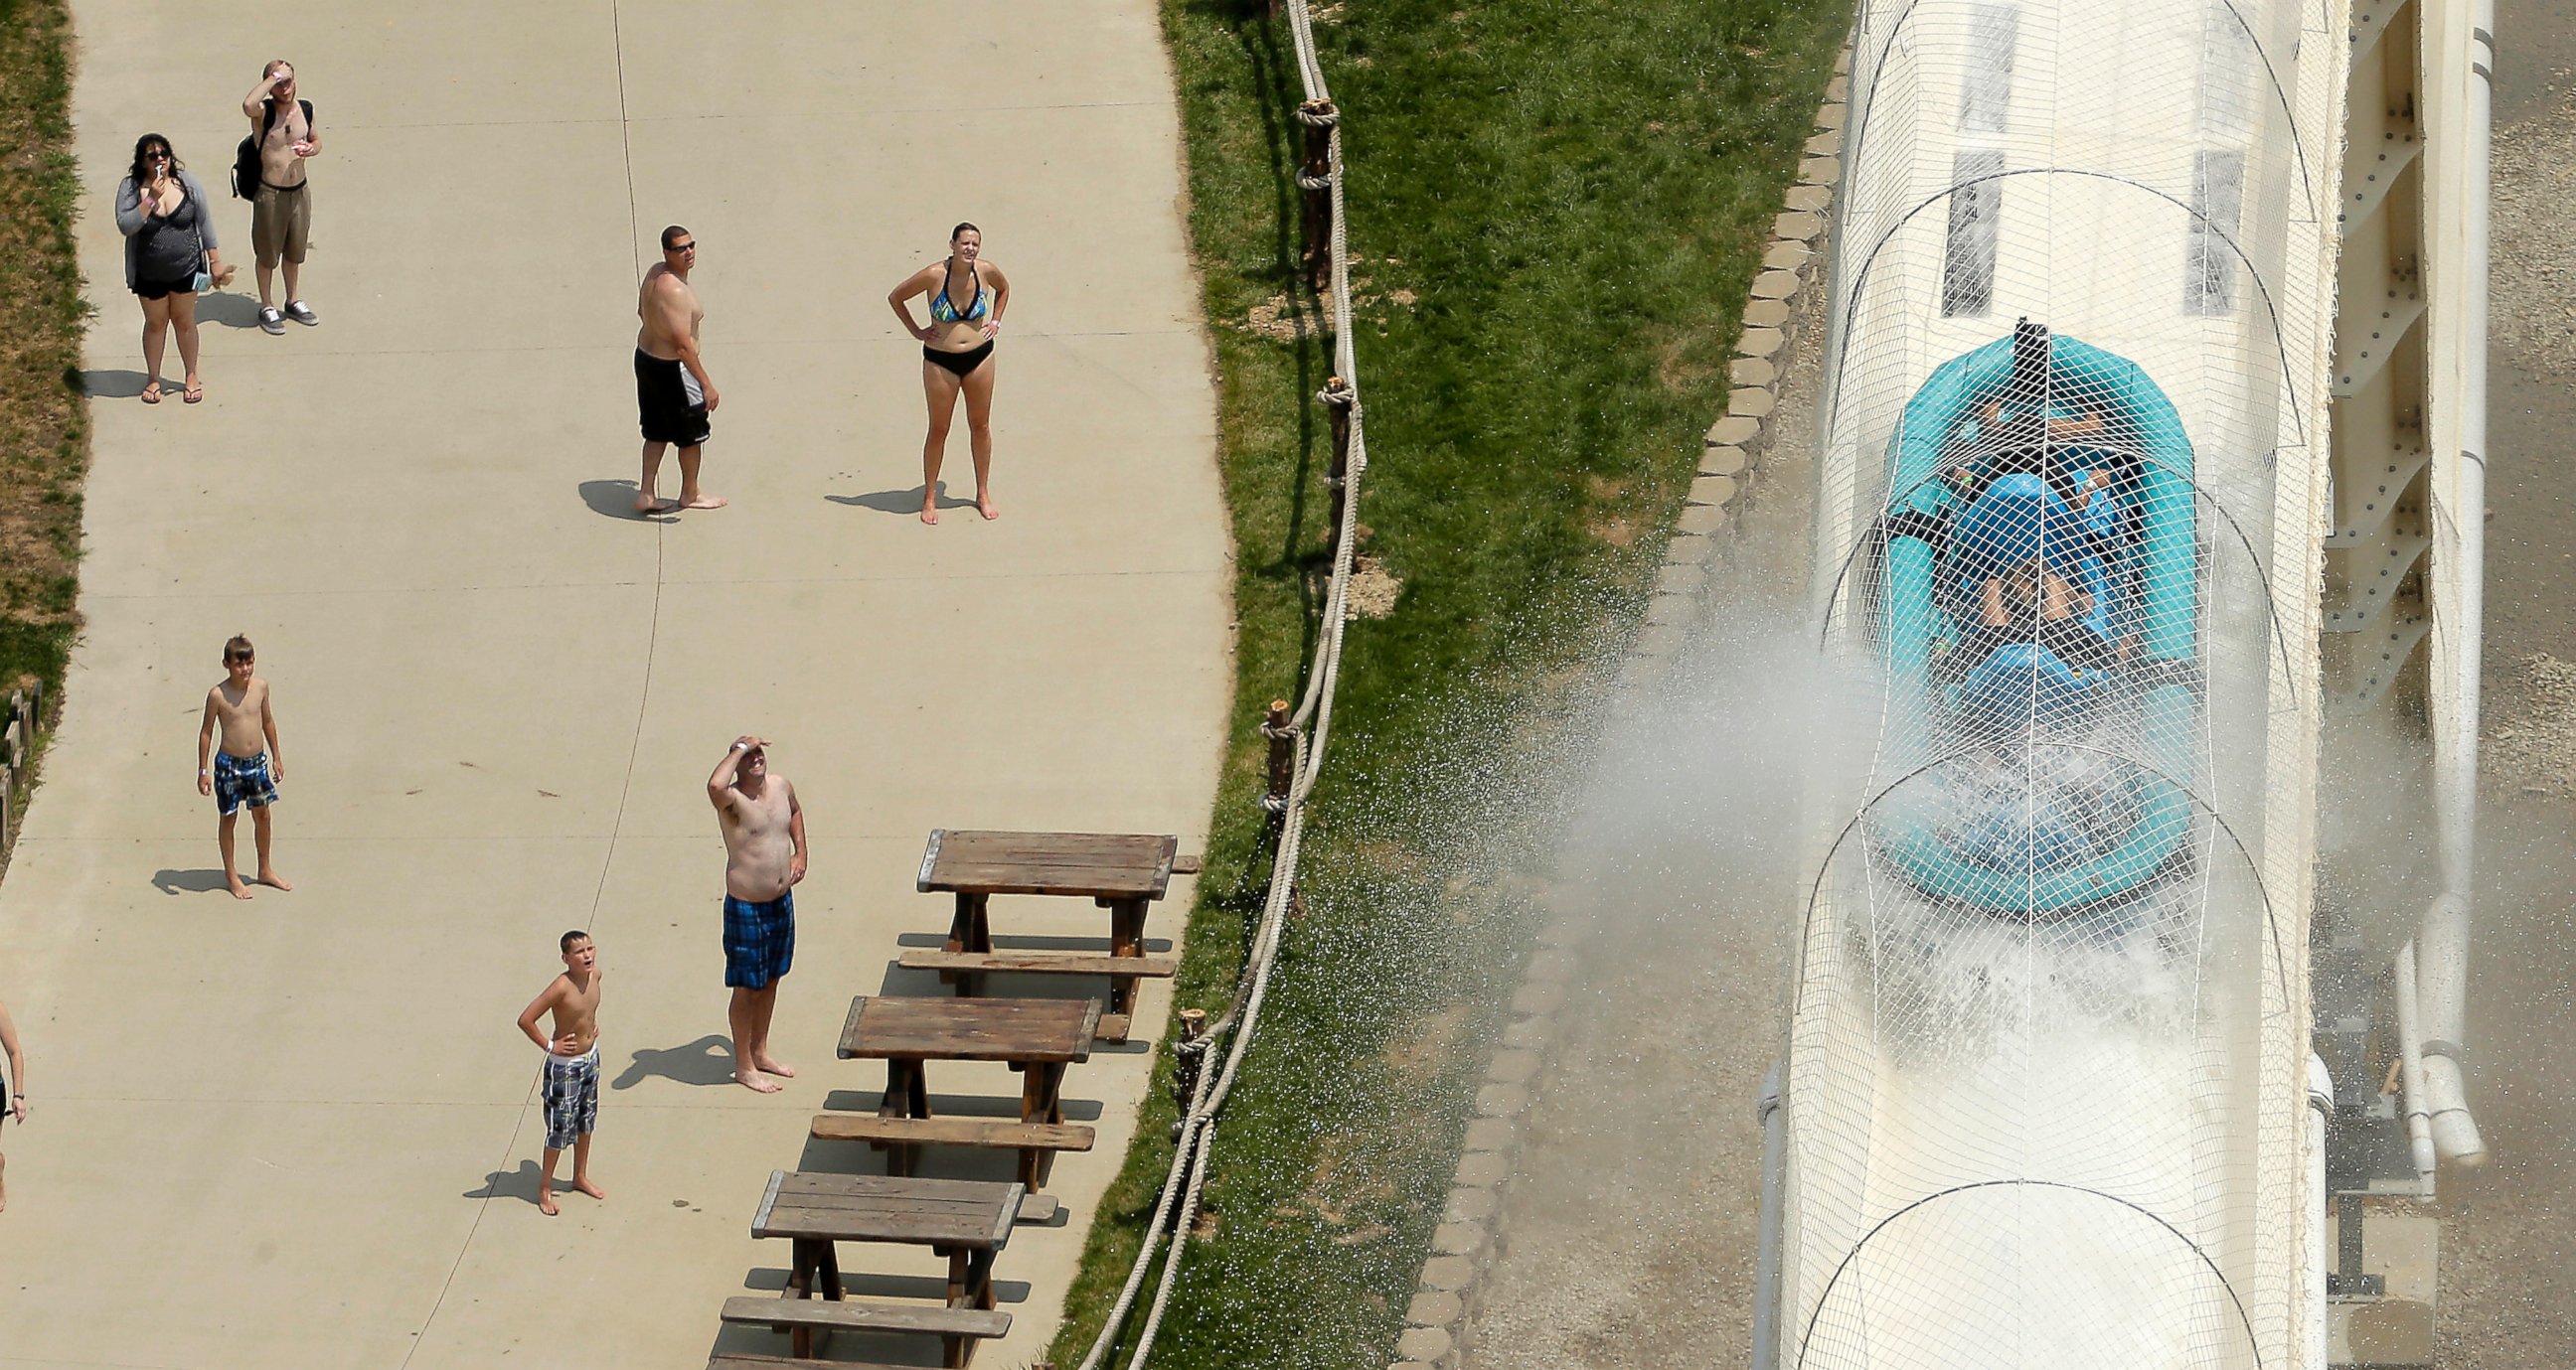 PHOTO: Riders are propelled by jets of water as they go over a hump while riding a water slide called "Verruckt" at Schlitterbahn Waterpark in Kansas City. 